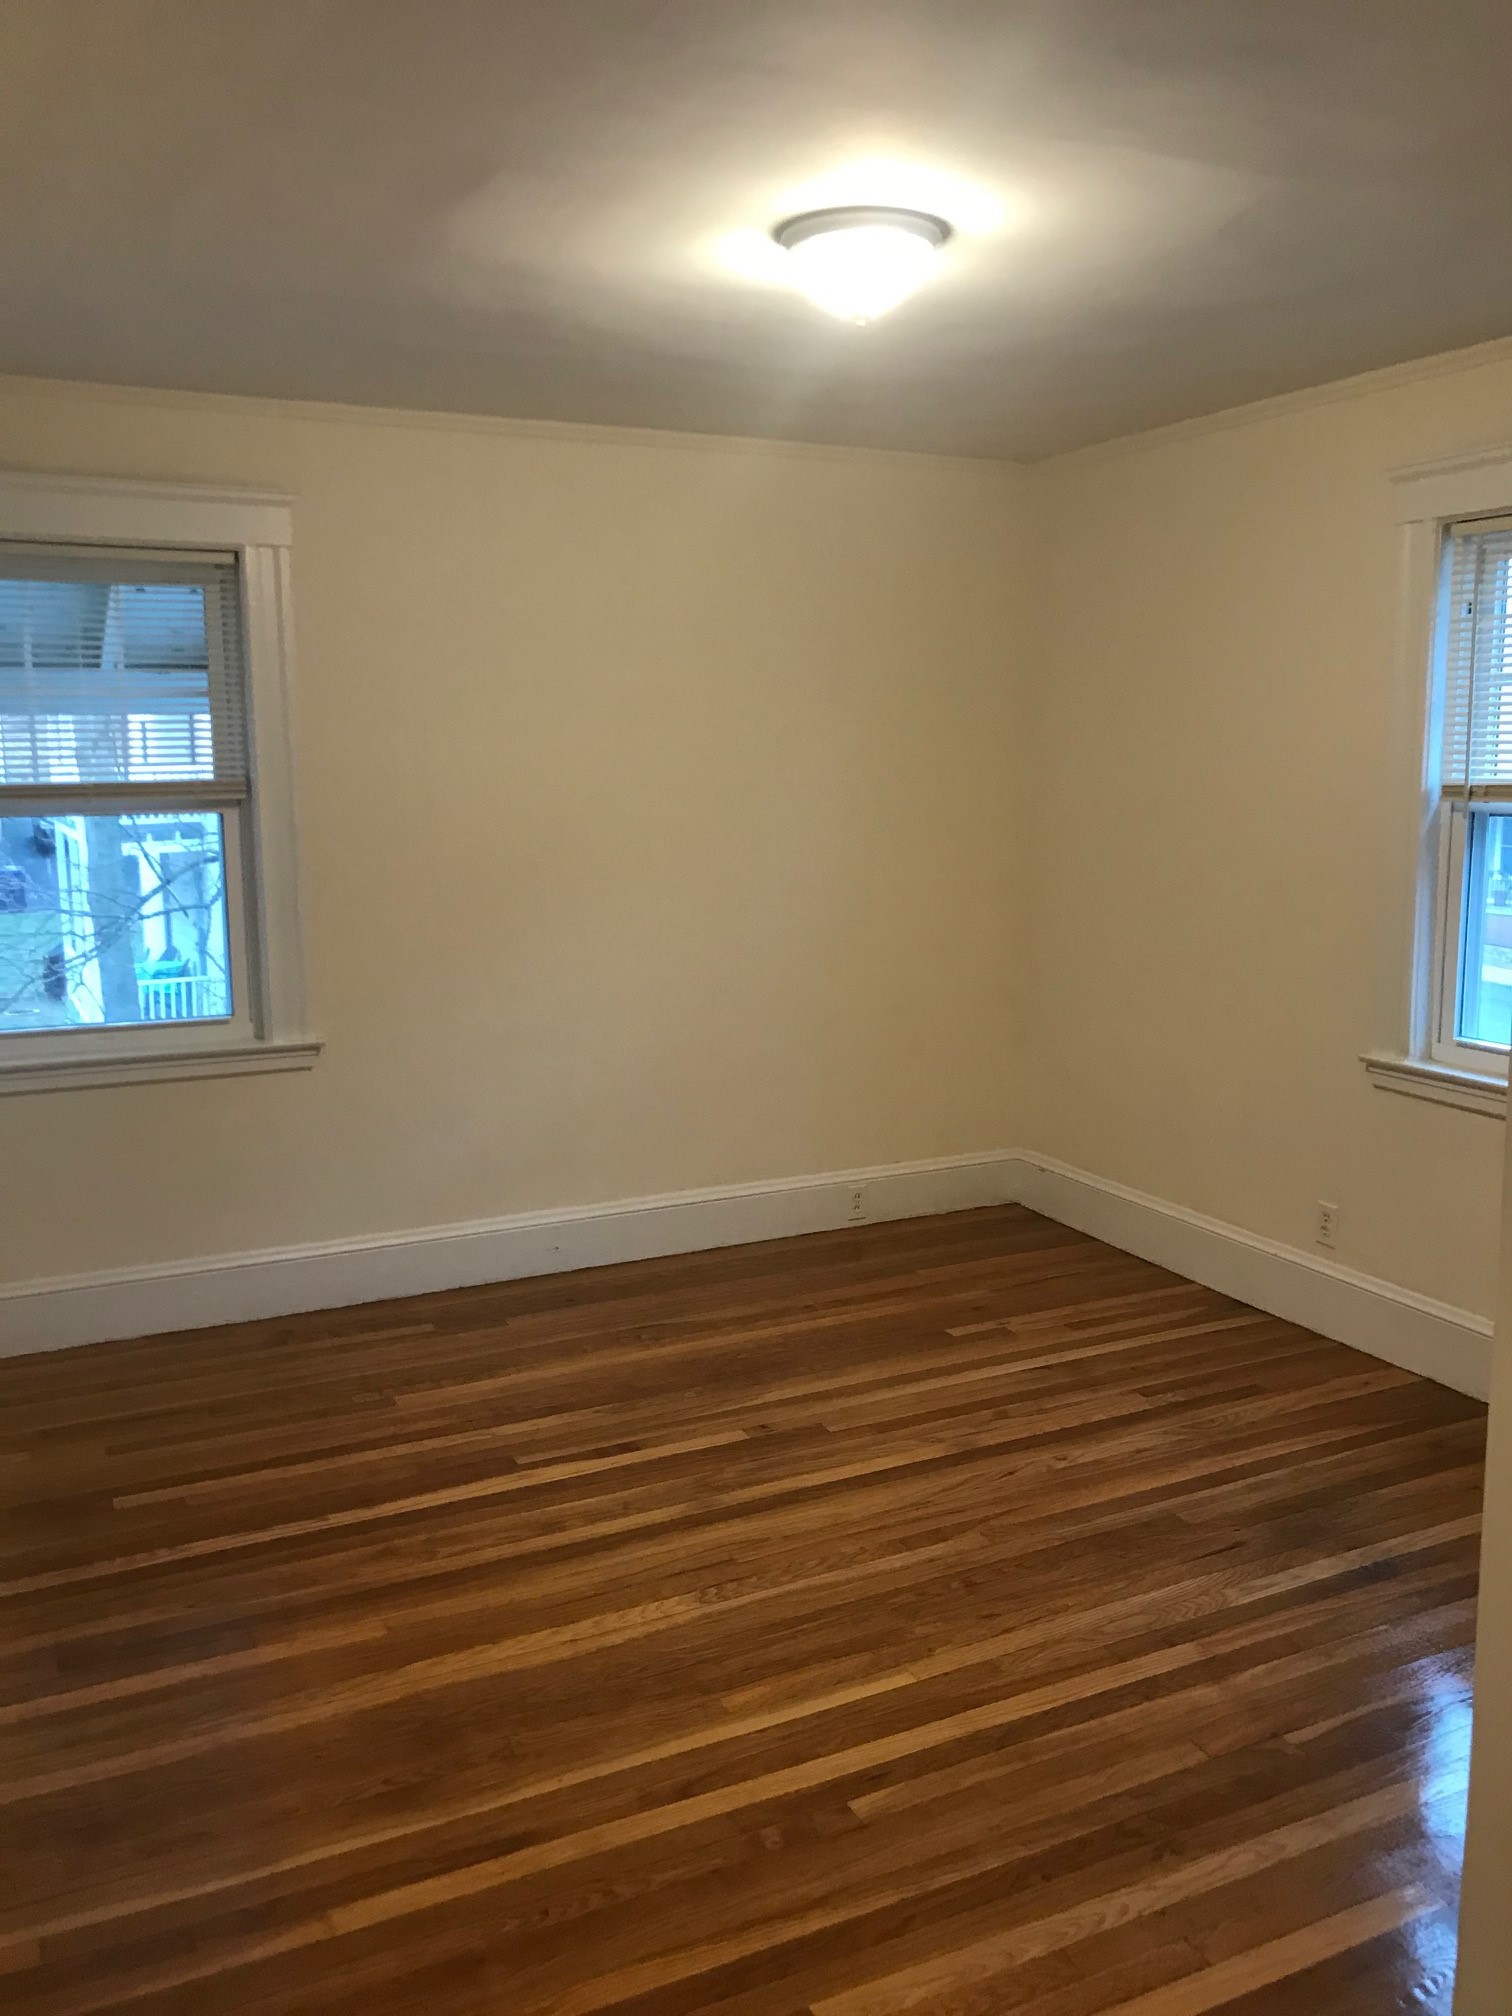 Photos of apartment on Willoughby St.,Boston MA 02135